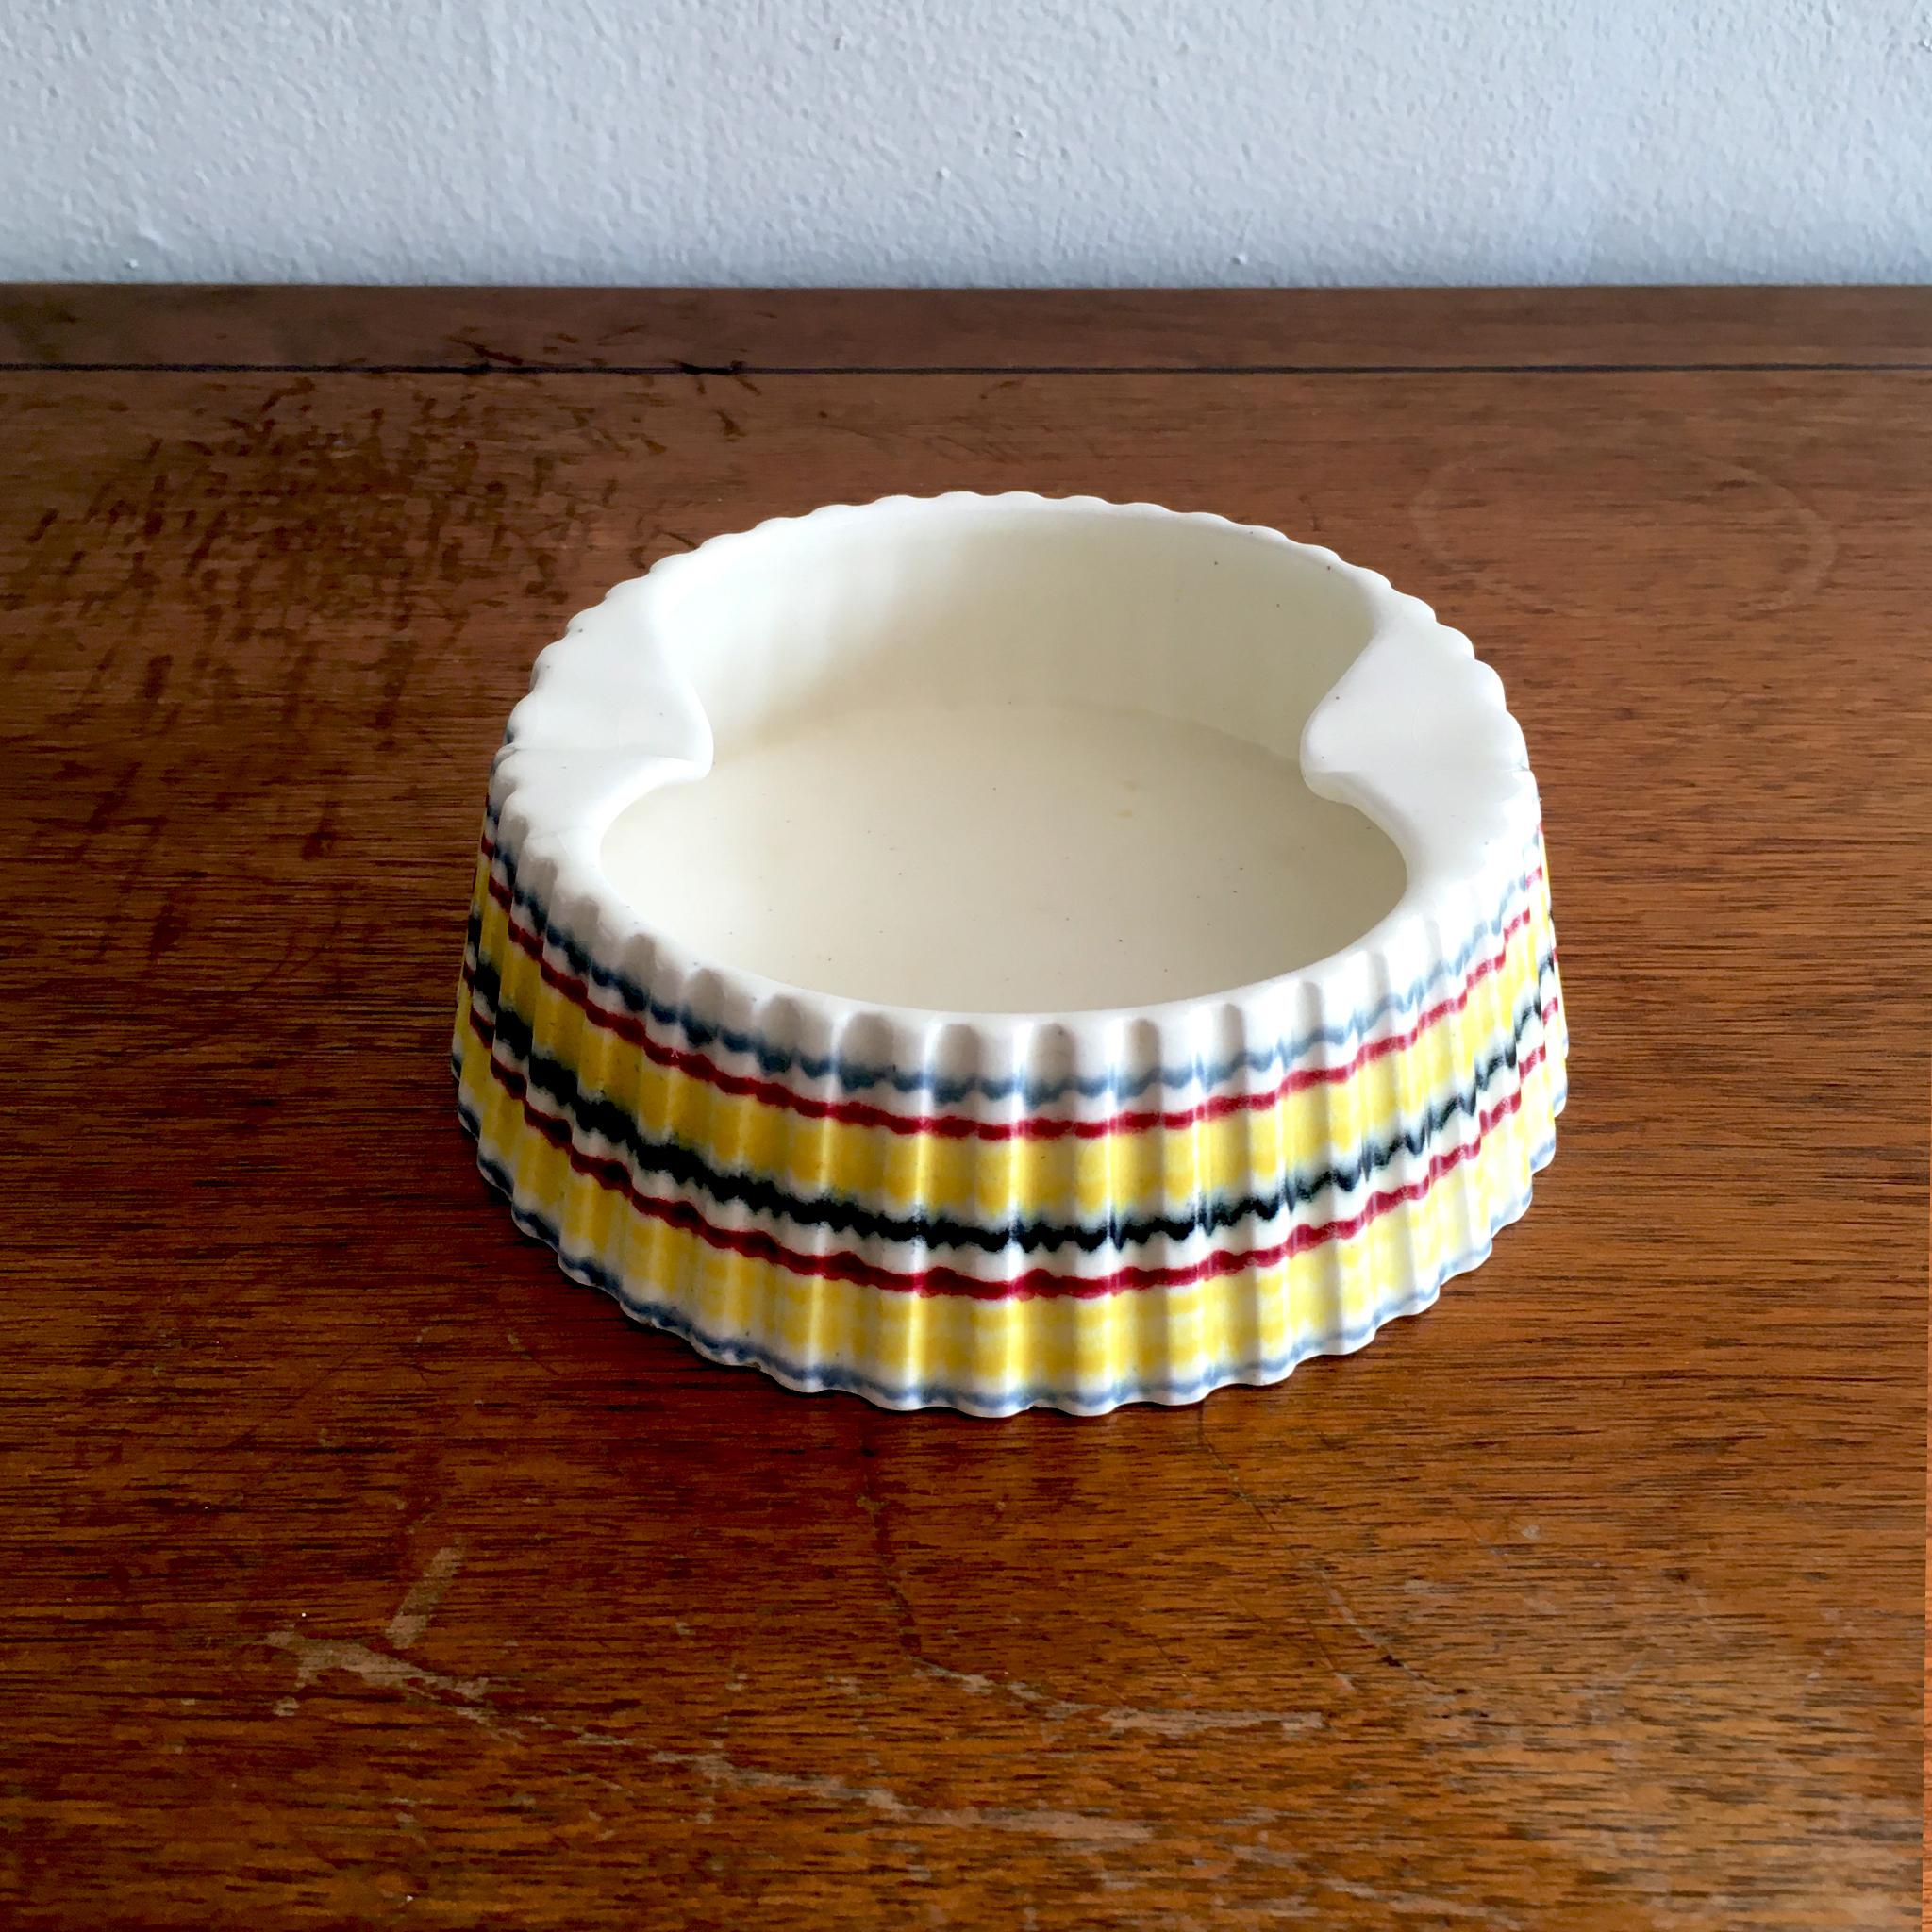 Rare Hornsea Pottery 'Rainbow' ashtray catchall, this unique vintage piece is from 1960s England with a likeness to a Christian Dior pleated couture dress by Raf Simons, Spring-Summer 2015, see last two photos.